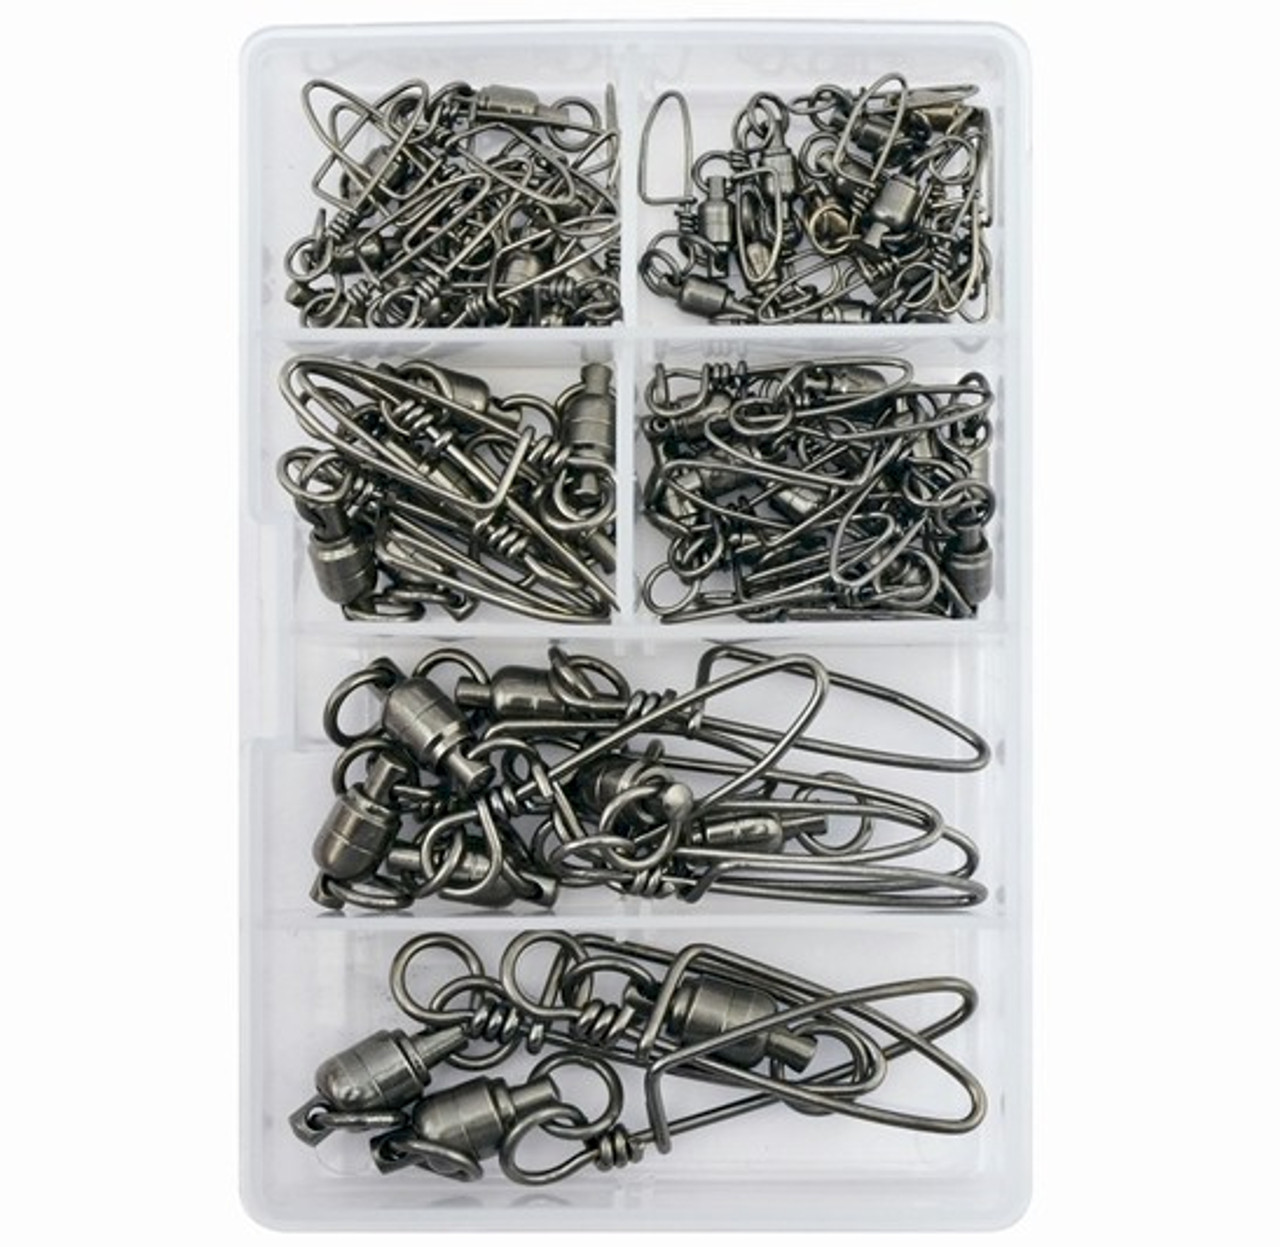 AFW Brass Ball Bearing Snap Swivels Kit, 51 Pieces 